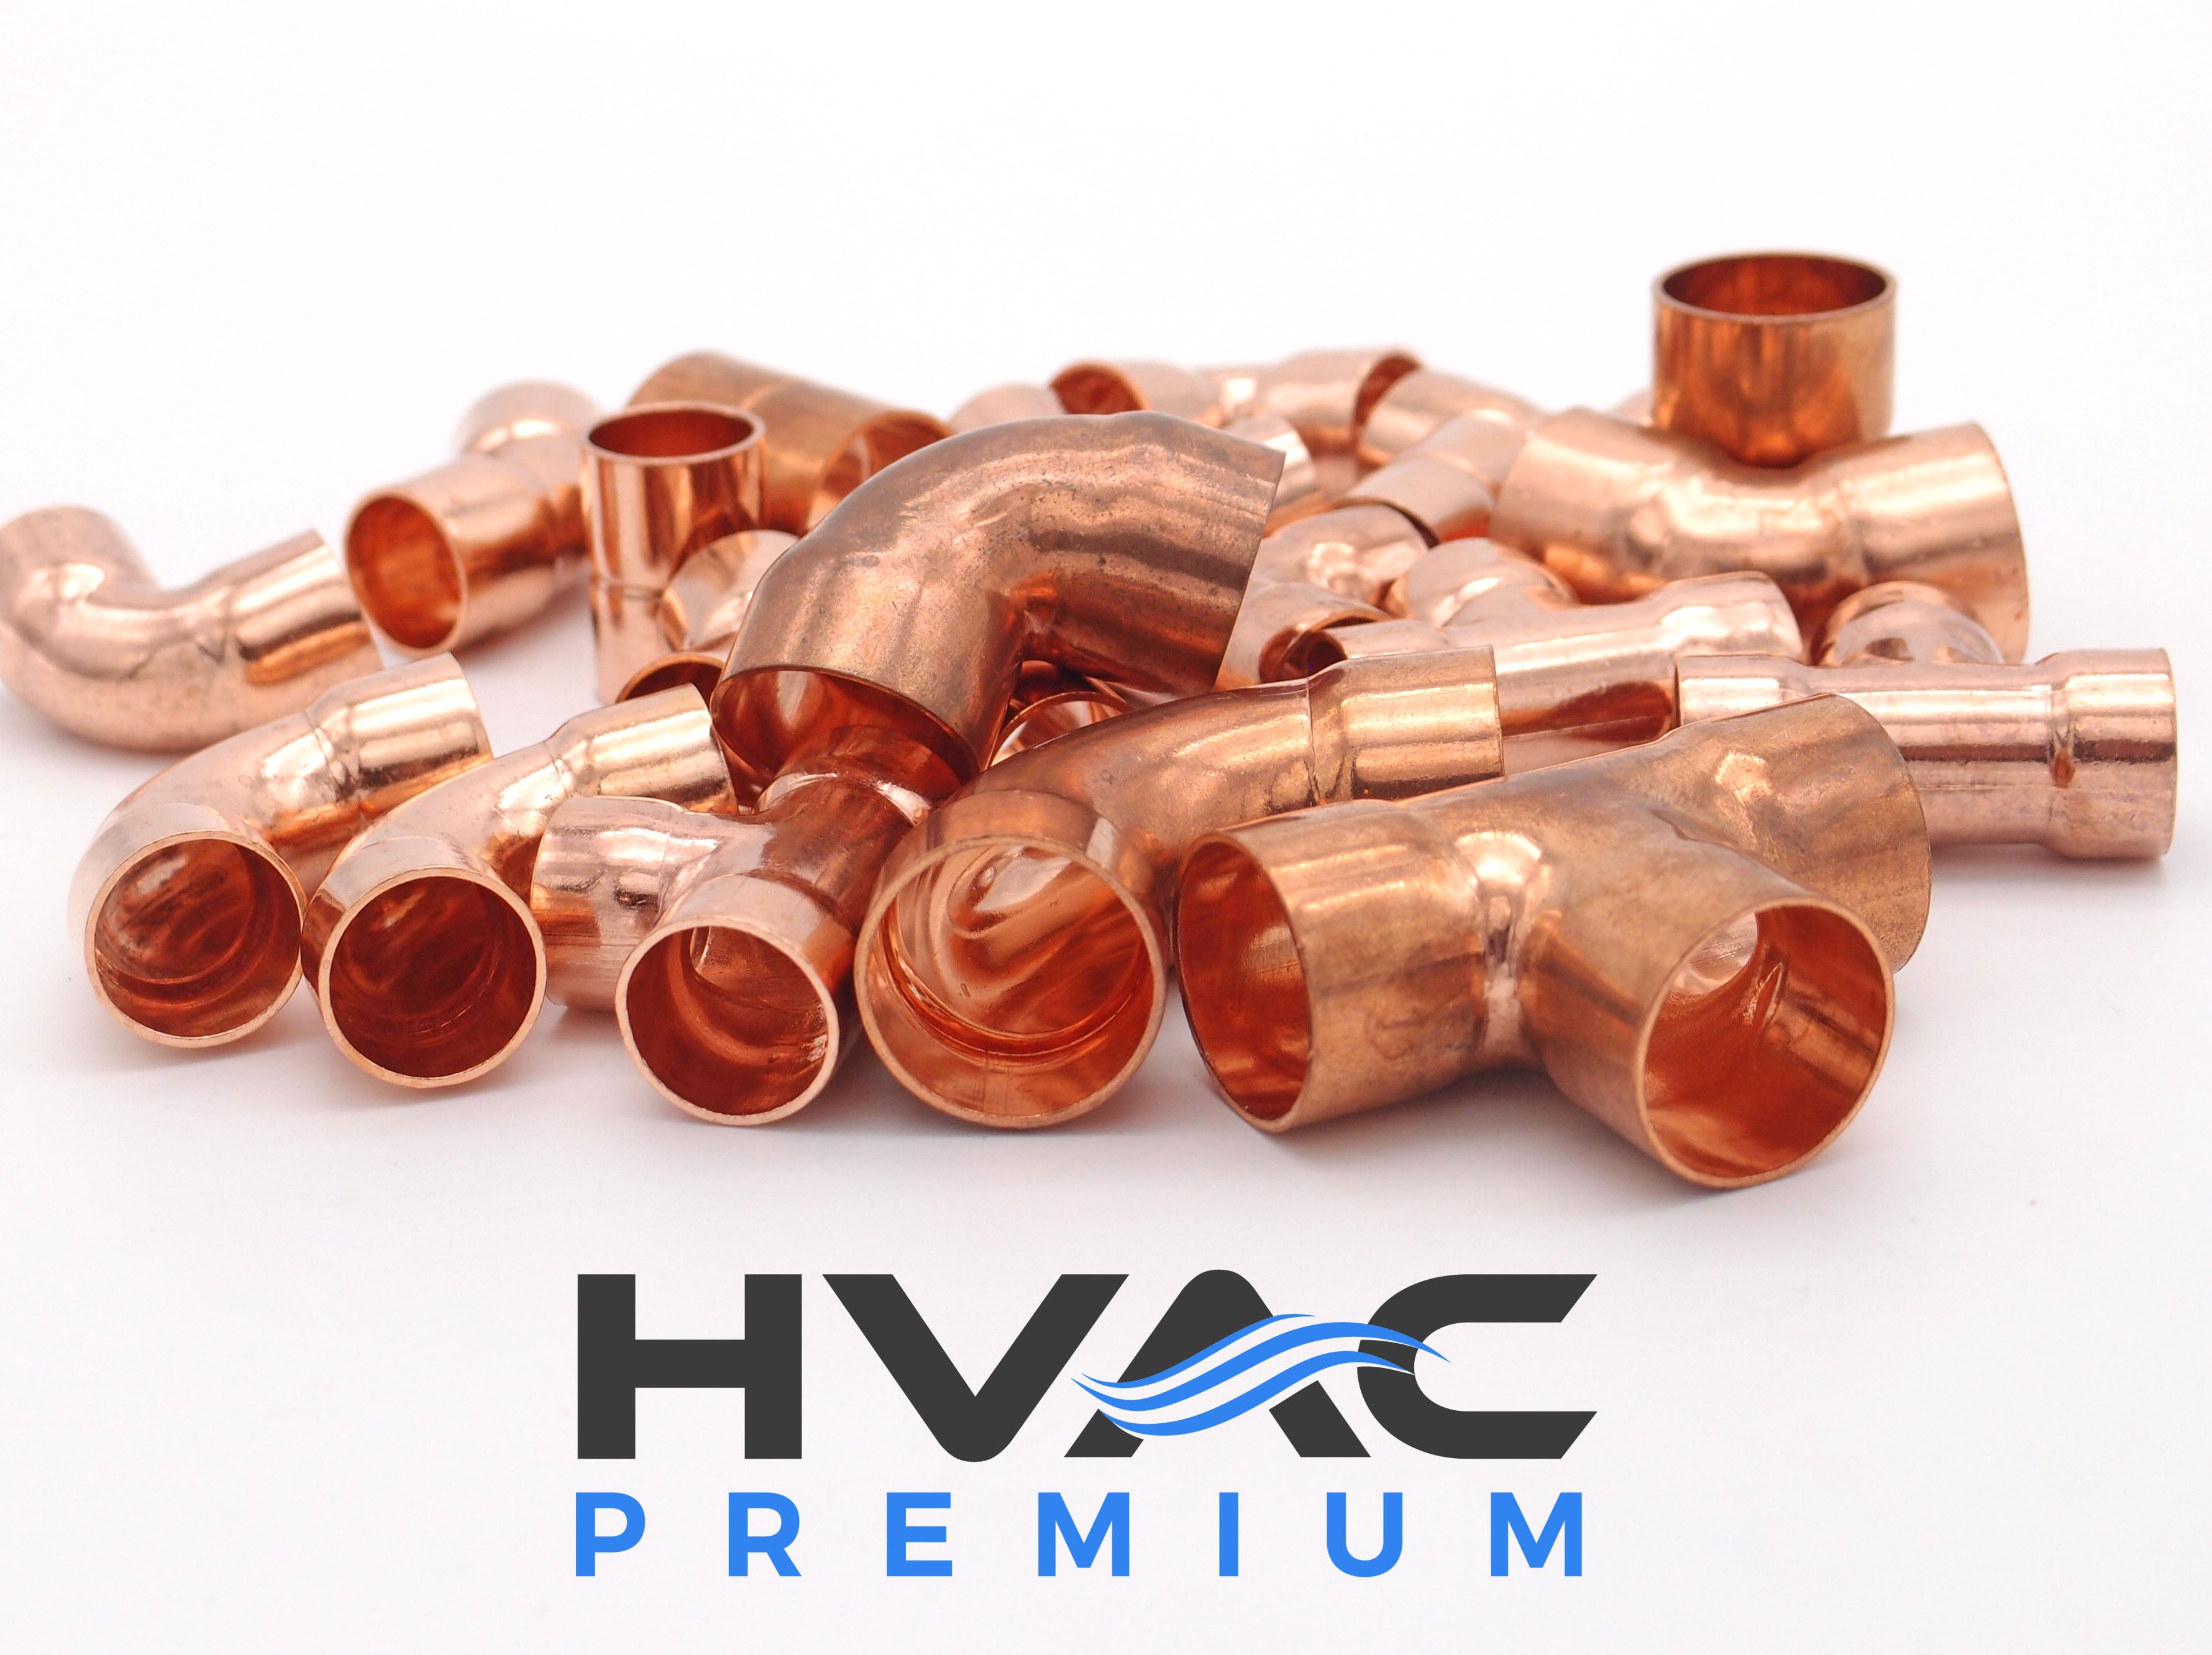 Copper Fitting 1 to 5/8 (HVAC Dimensions) Reducer / Increaser Copper Coupling & HVAC – 7/8 to 1/2 (Plumbing Inner Dimensions) 99.9% Pure Copper - 10 Pack